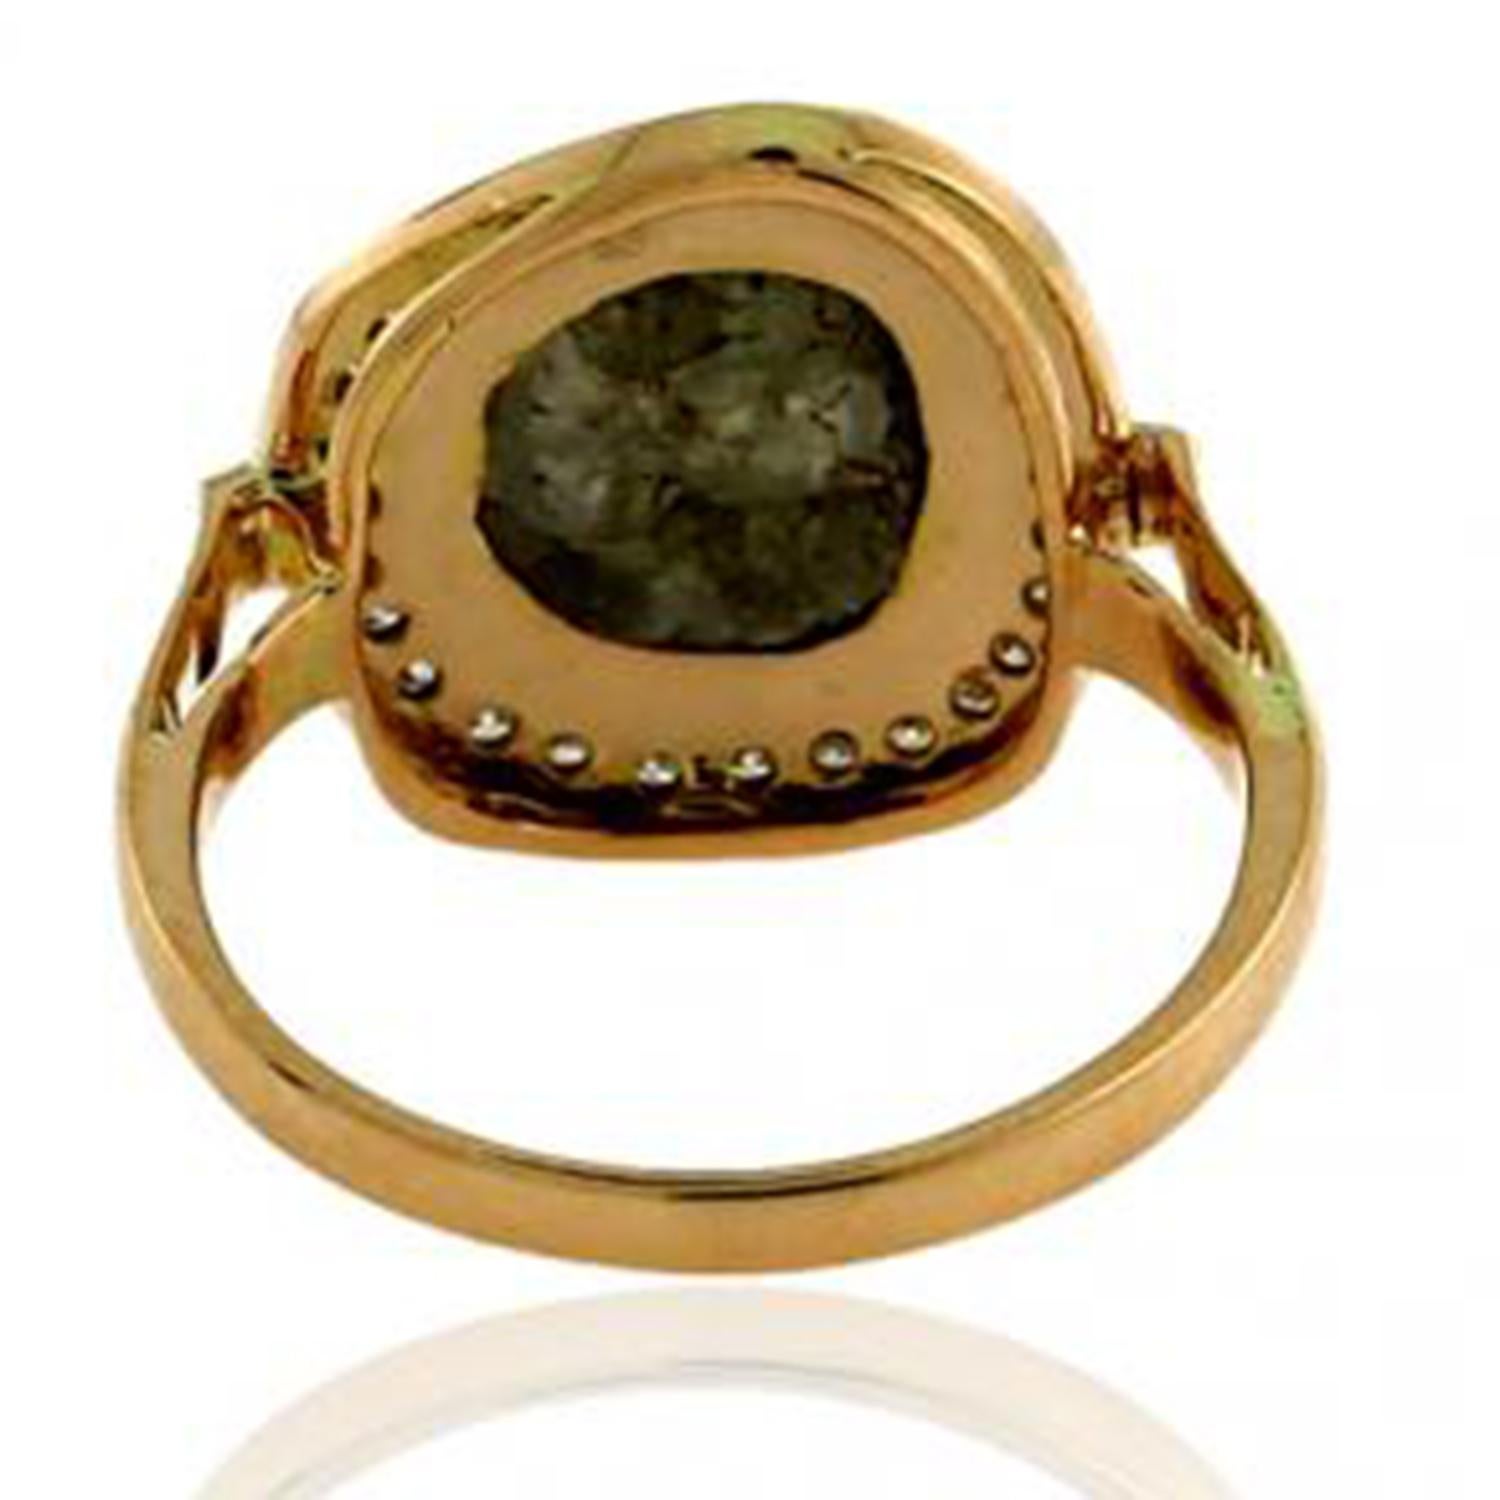 18k:4.98g;
Diamant : 3,87ct
Taille : 26X17MM